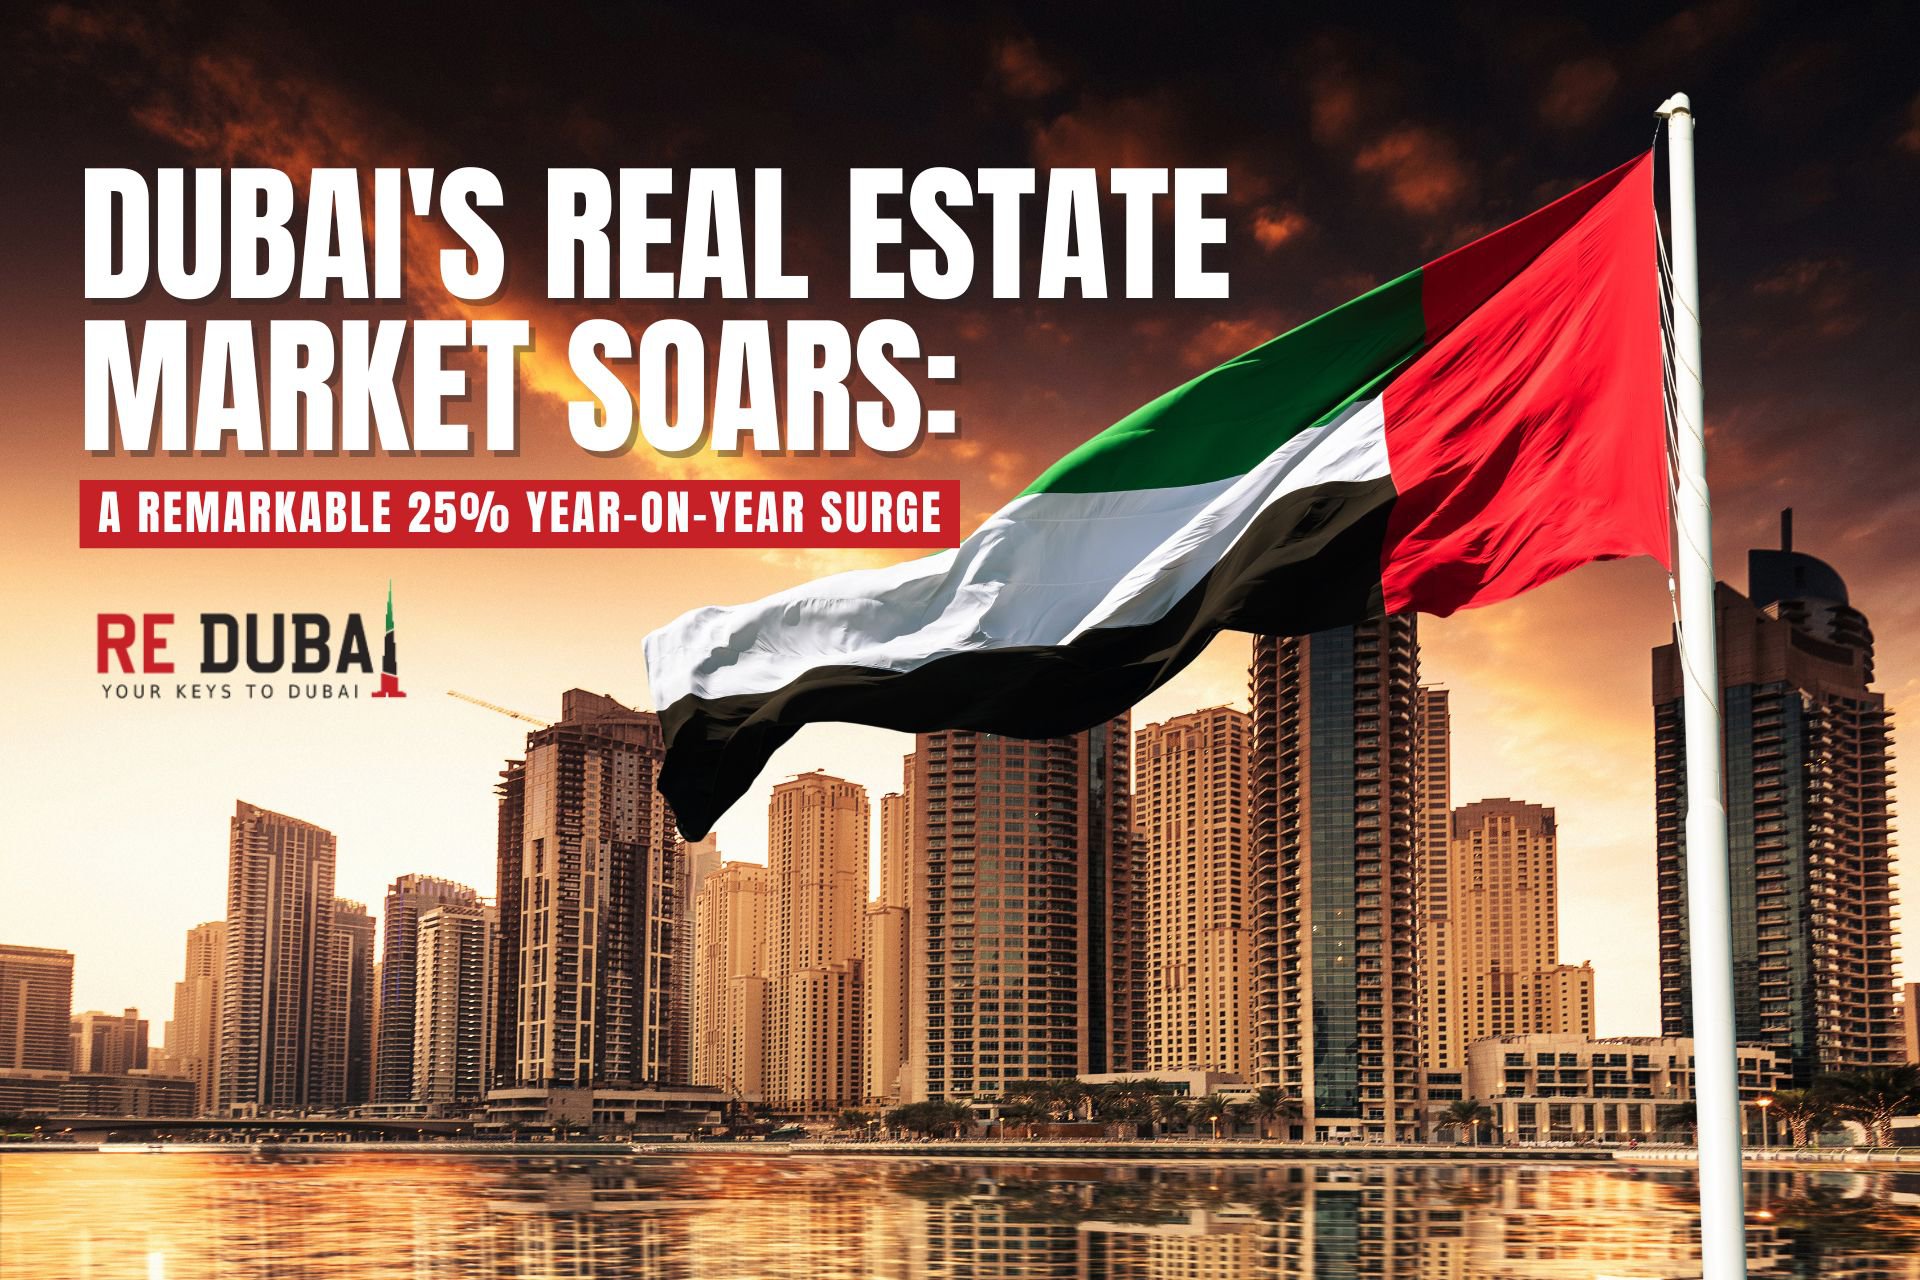 Dubai's Real Estate Market Soars: A Remarkable 25% Year-on-Year Surge cover